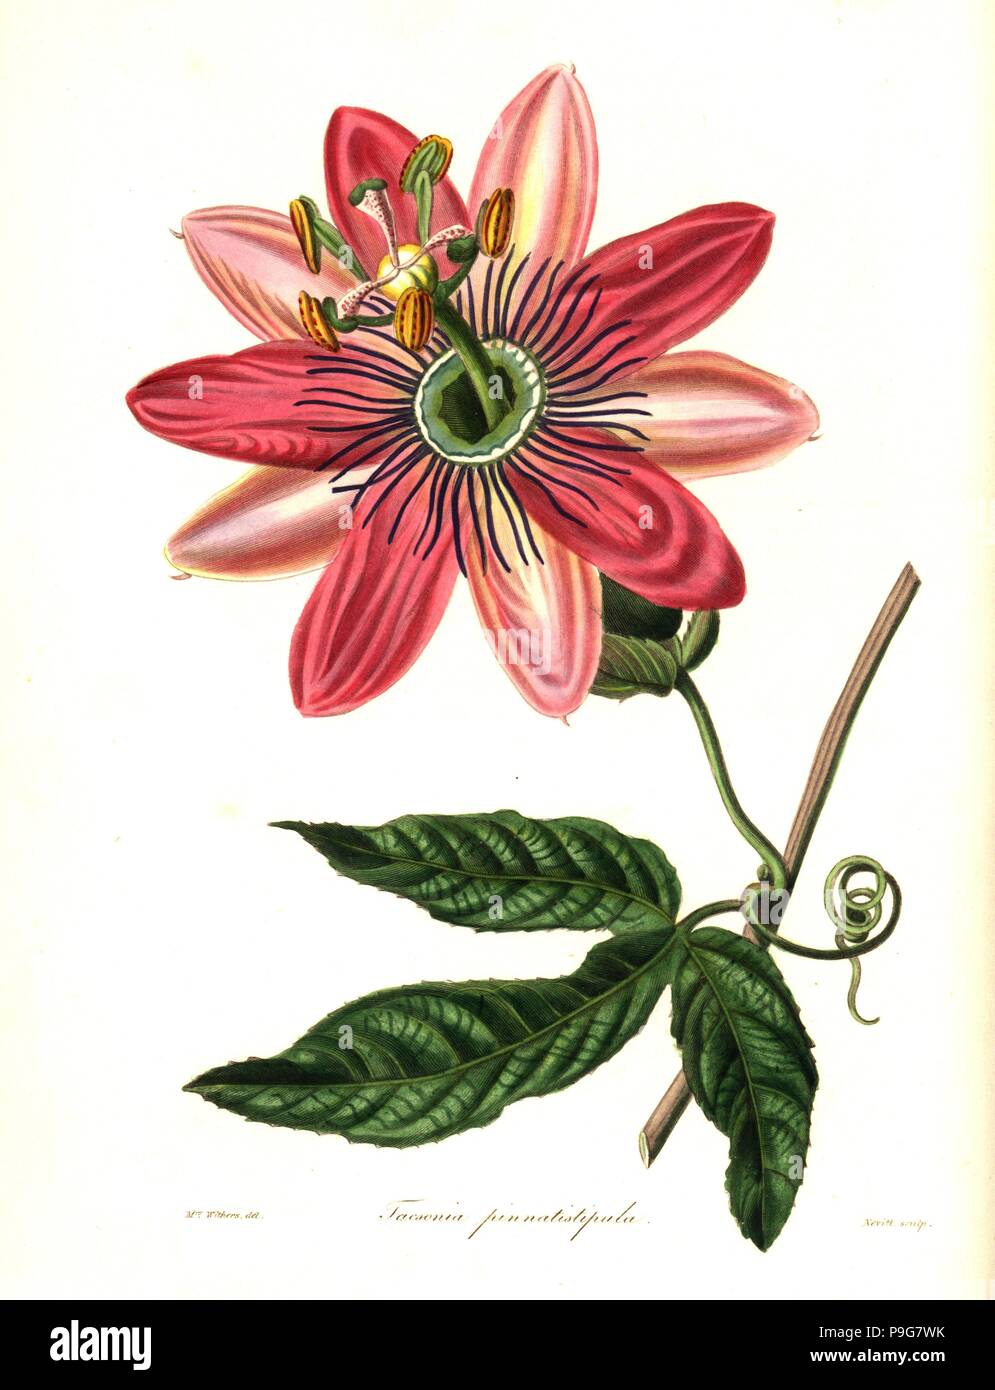 Poro poro, Passiflora pinnatistipula (Feather-stipuled tacsonia, Tacsonia pinnatistipula). Endangered. Handcoloured copperplate engraving by S. Nevitt after a botanical illustration by Mrs Augusta Withers from Benjamin Maund and the Rev. John Stevens Henslow's The Botanist, London, 1836. Stock Photo